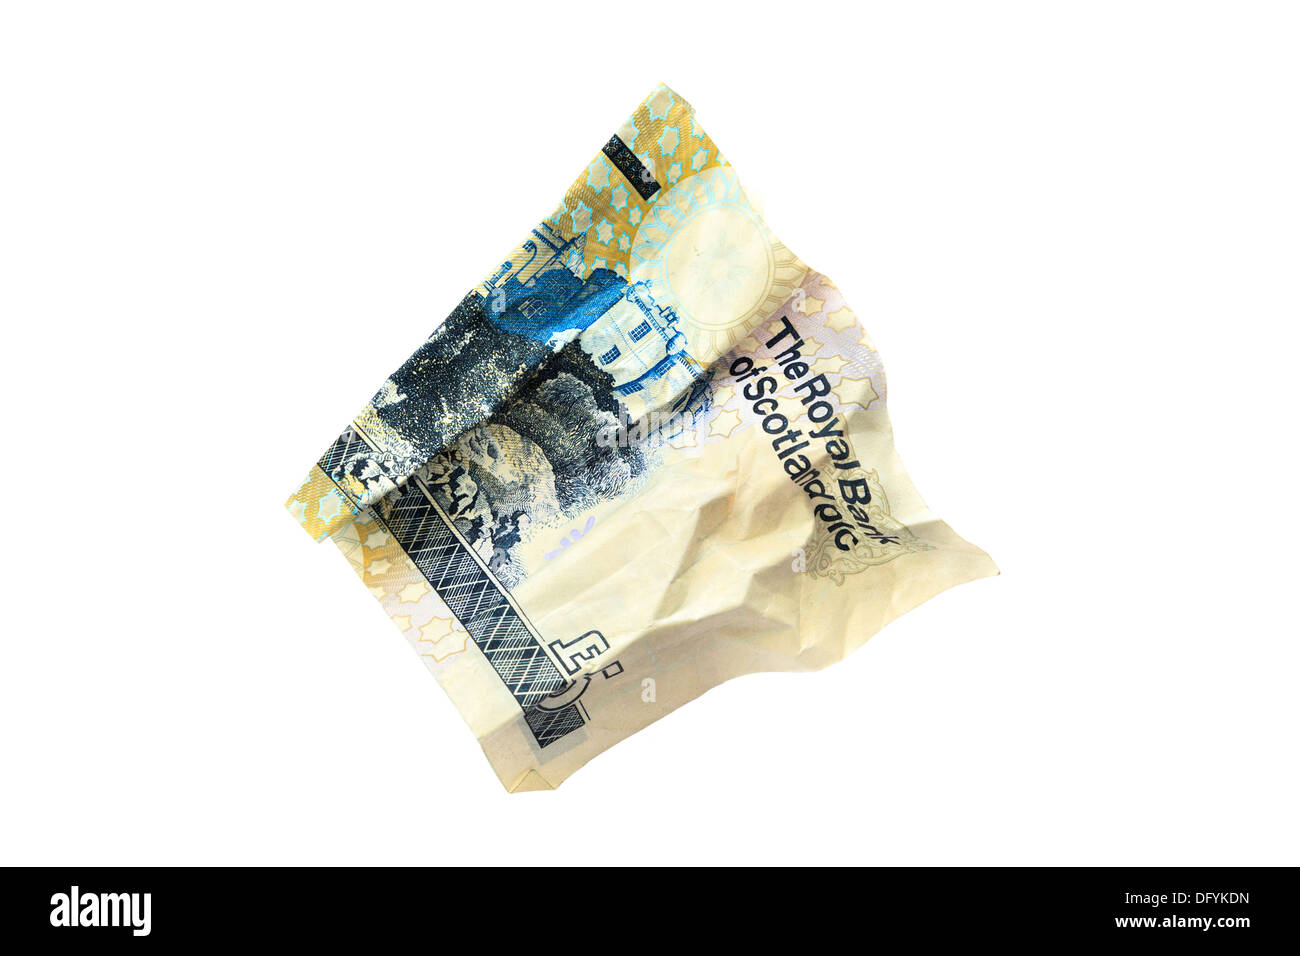 Royal Bank of Scotland Scottish five pound note screwed up and isolated on white. Britain UK. Stock Photo